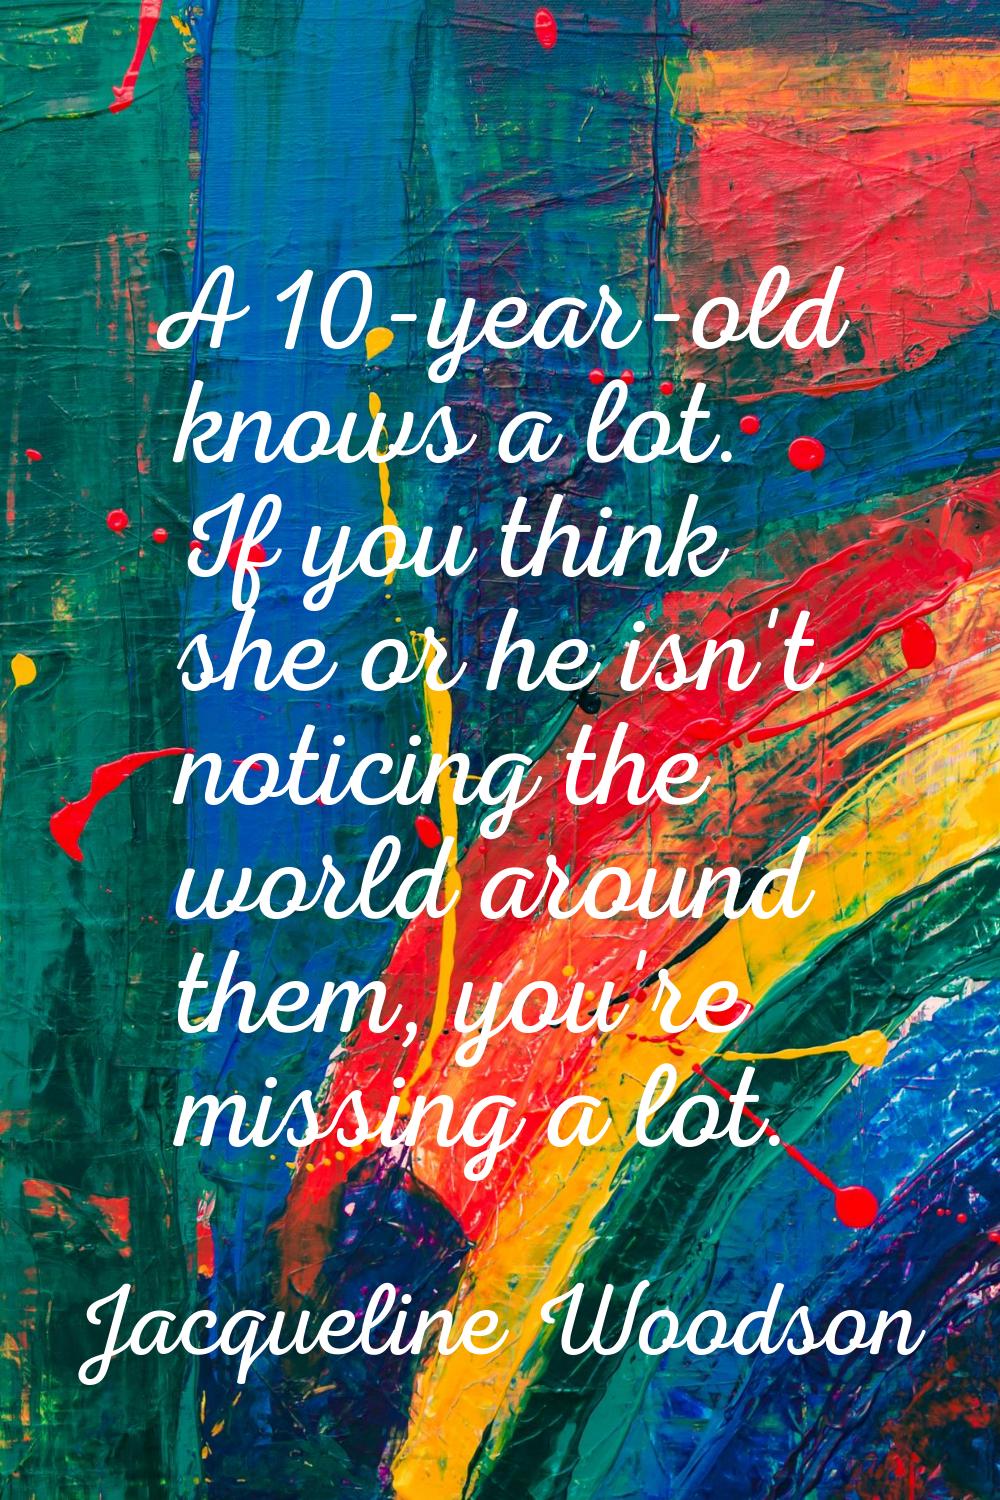 A 10-year-old knows a lot. If you think she or he isn't noticing the world around them, you're miss